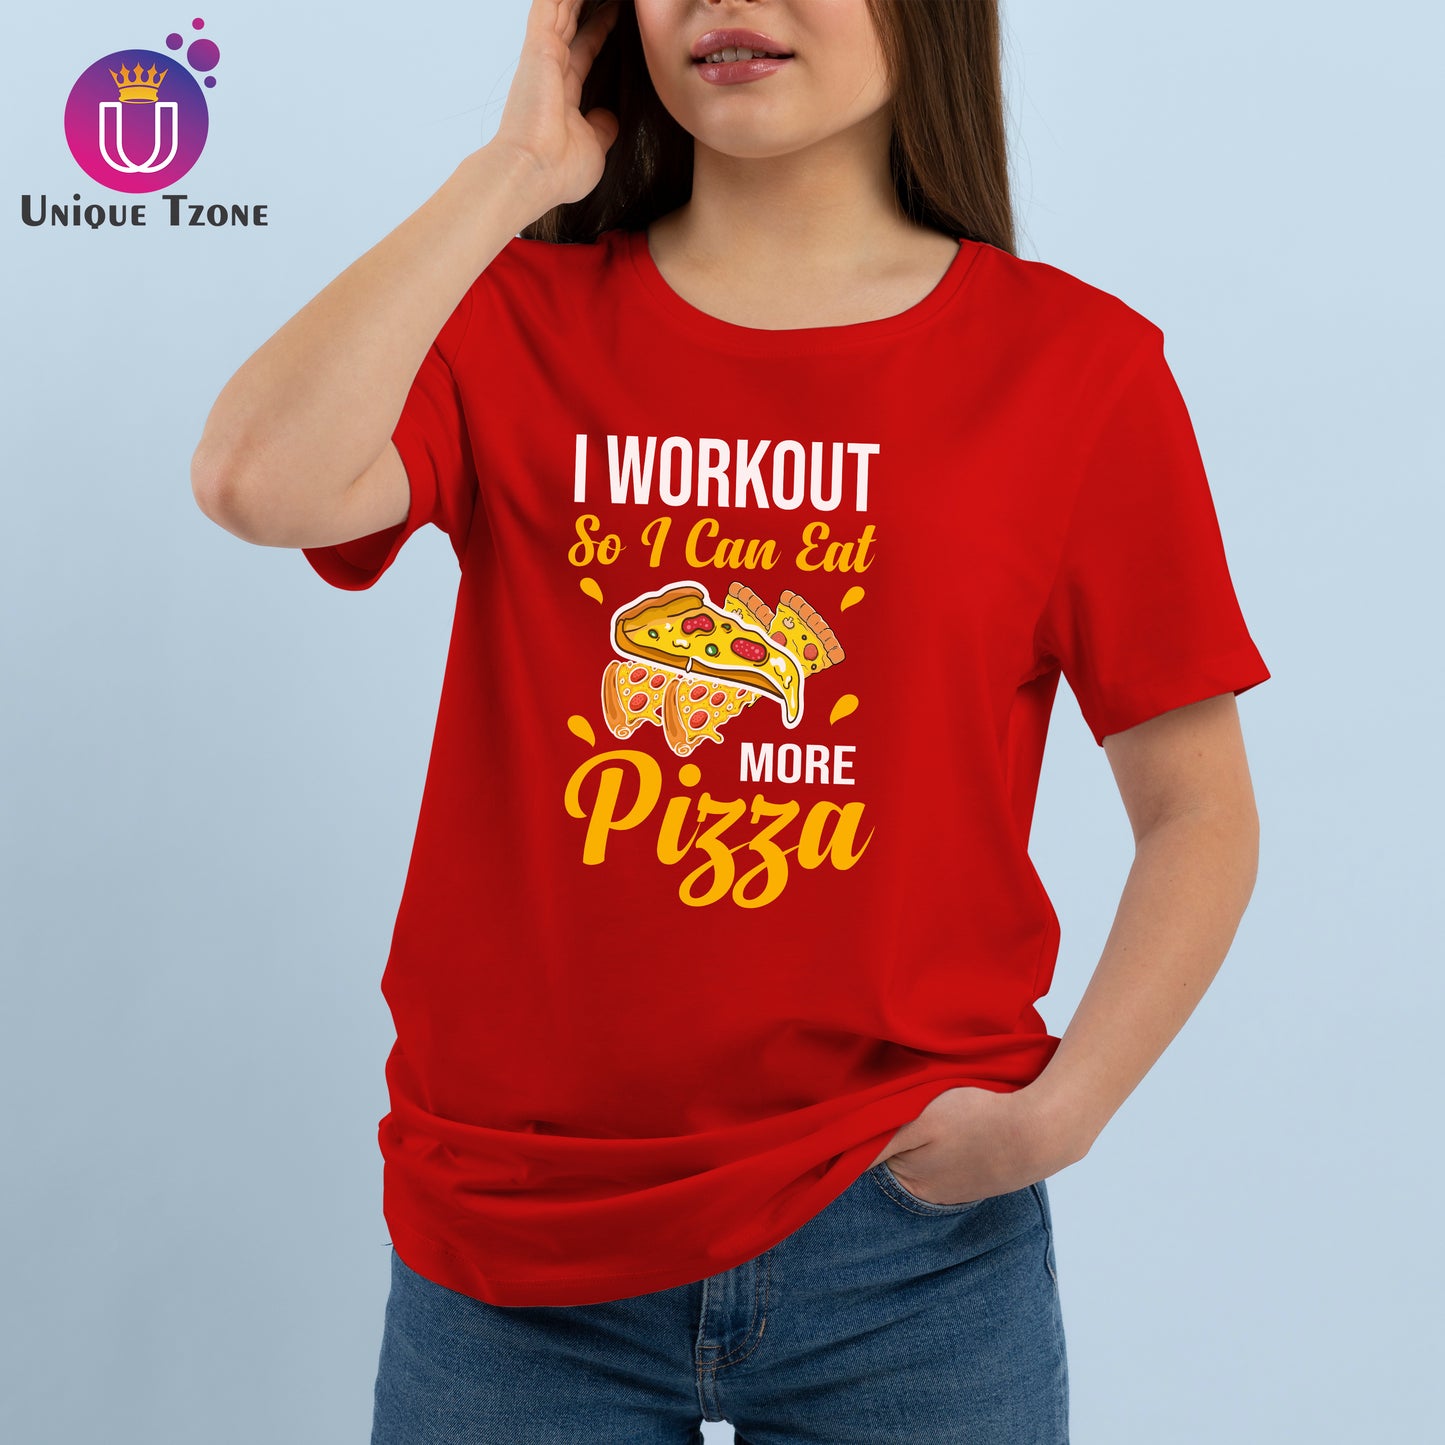 I Workout So I Can Eat Pizza Red Half Sleeve Foodie Cotton Round Neck T-shirt